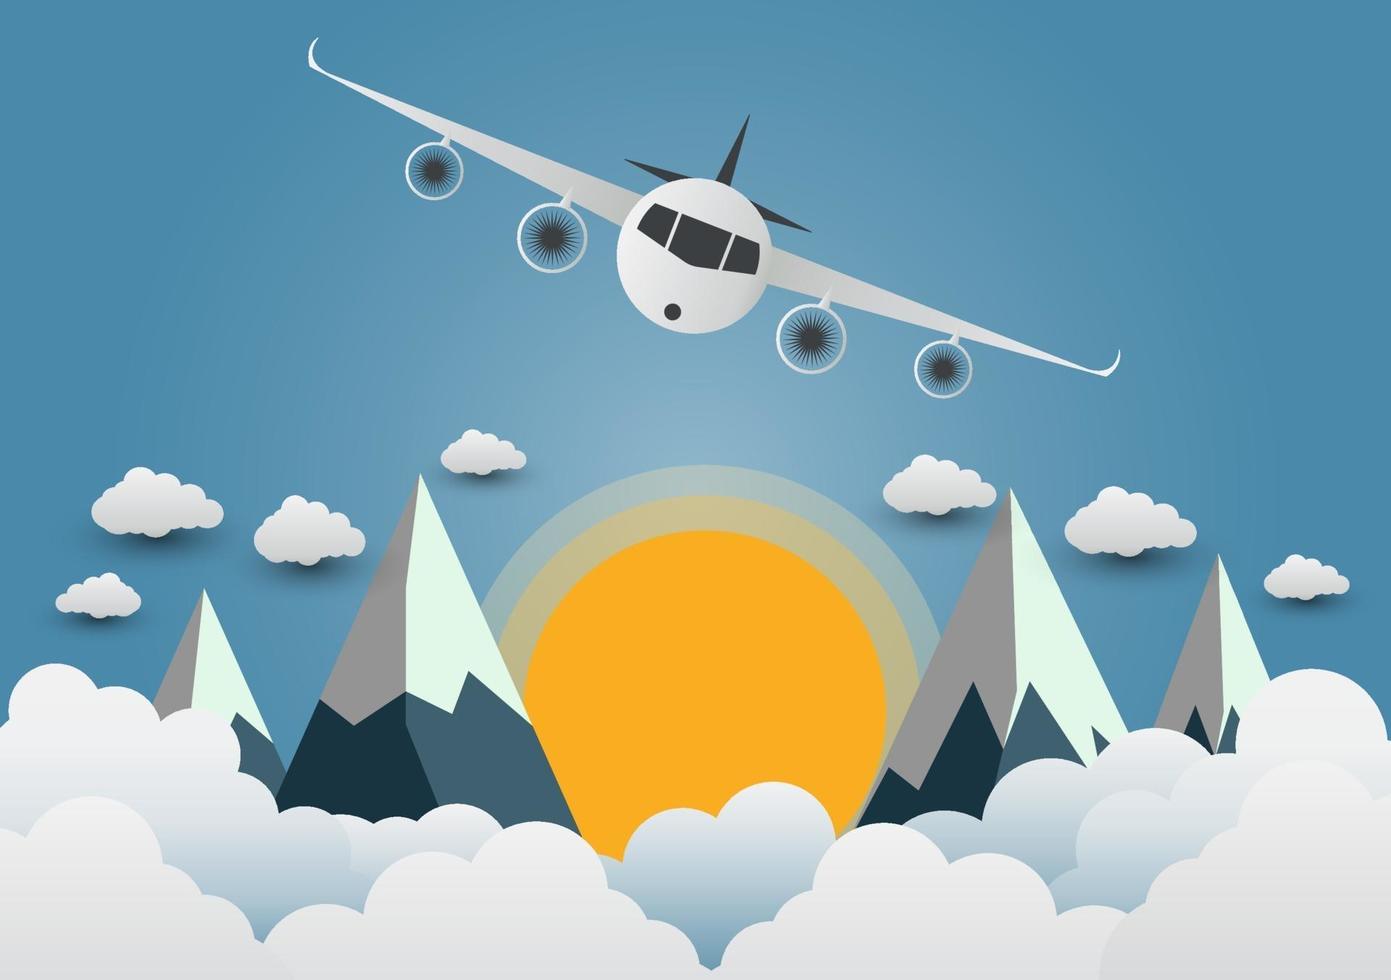 The plane soars over the mountains with beautiful sunsets over the clouds. vector